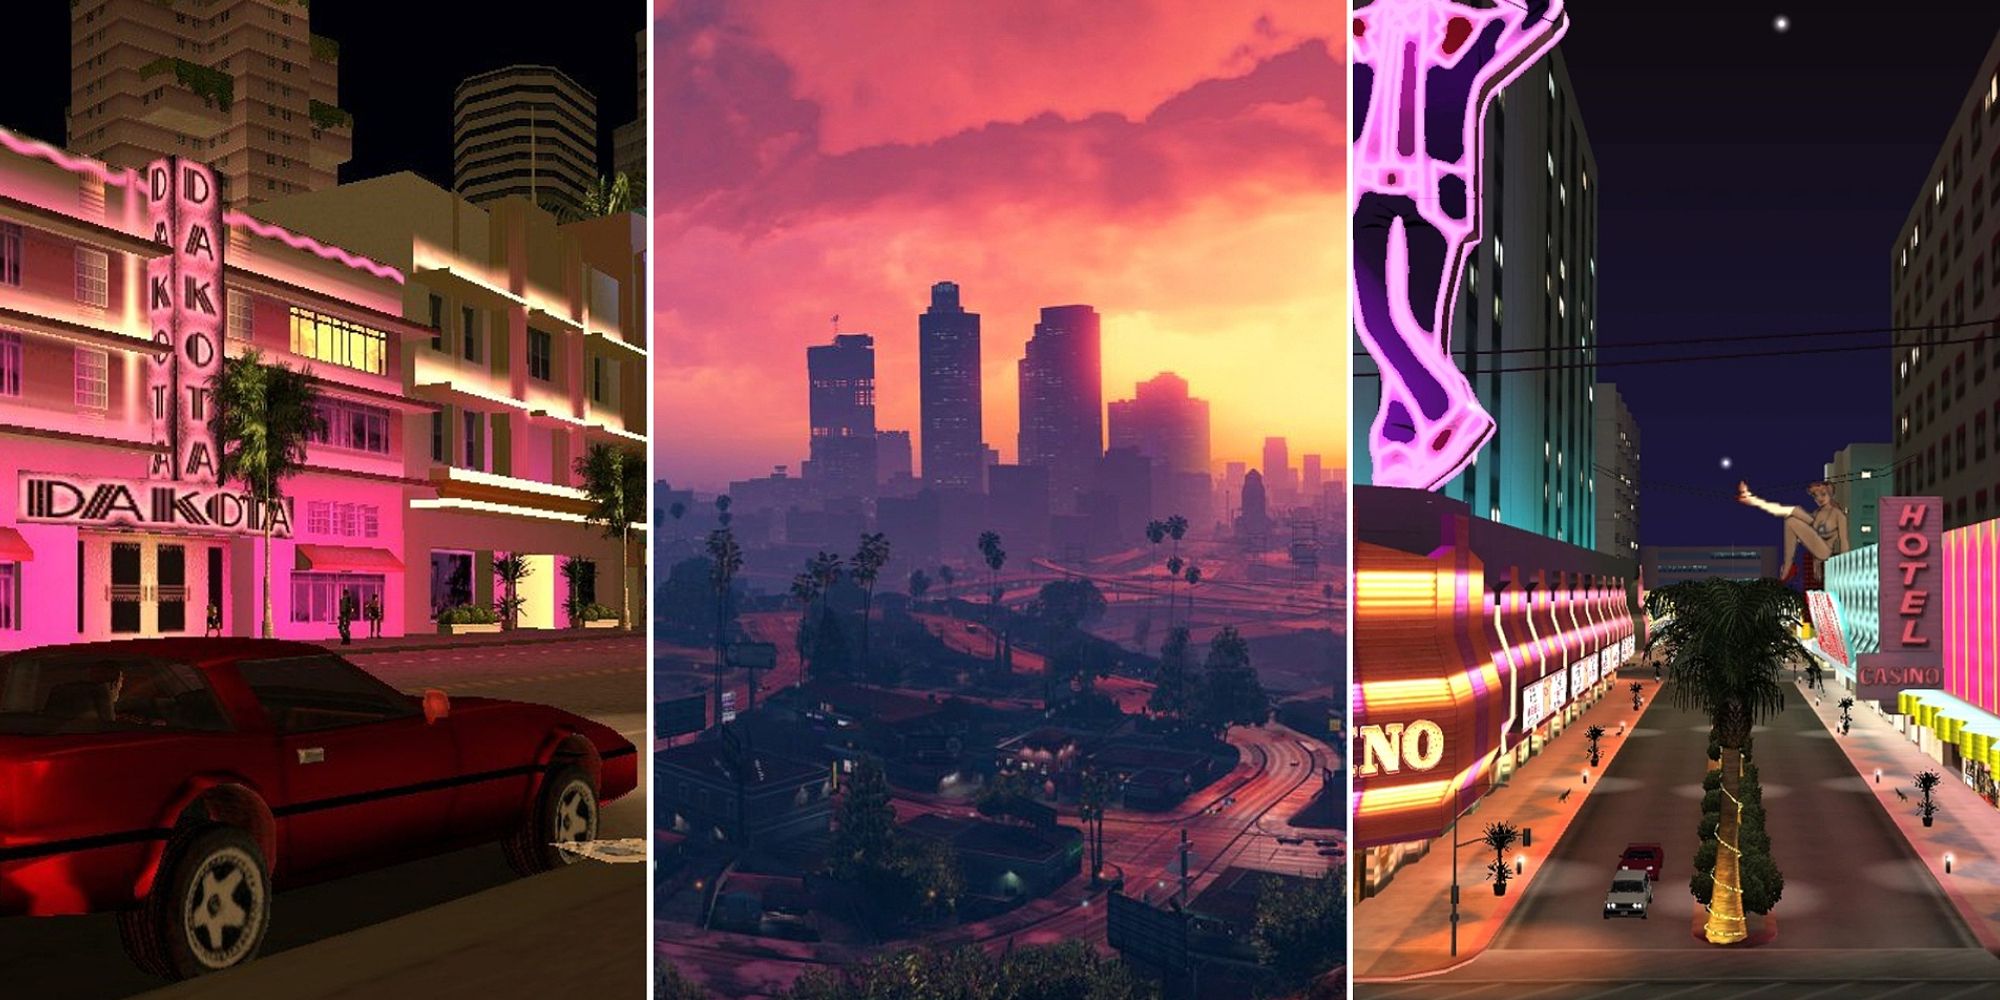 3 major cities and 4 sub cities: Private Conversations Around GTA